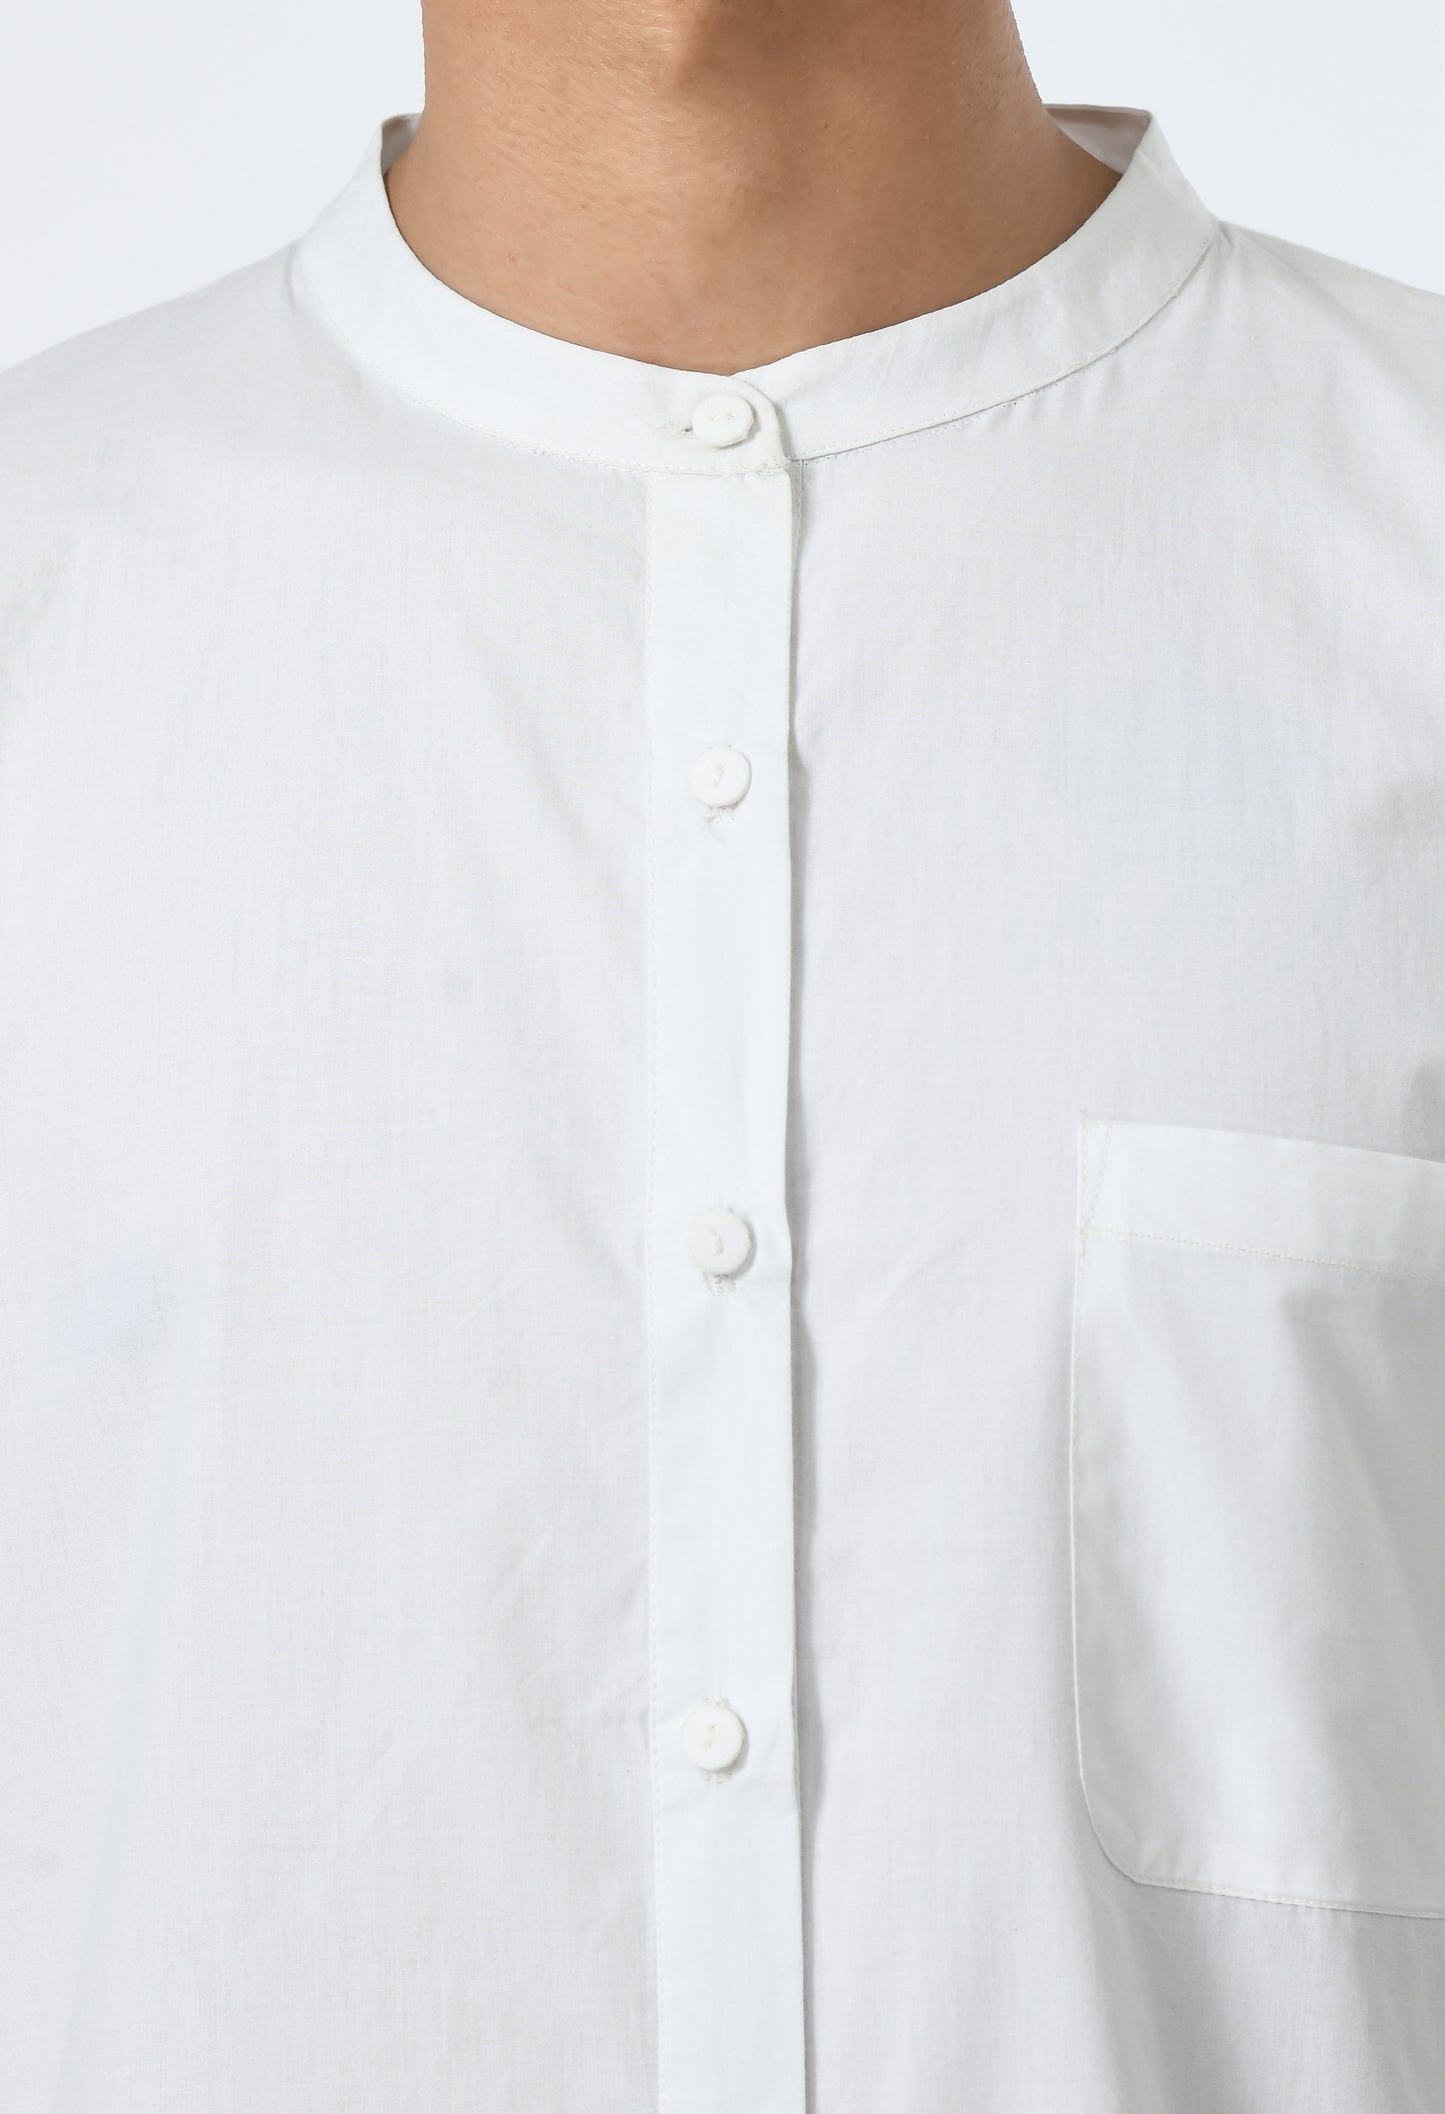 White unisex cotton shirt with Chinese collar.